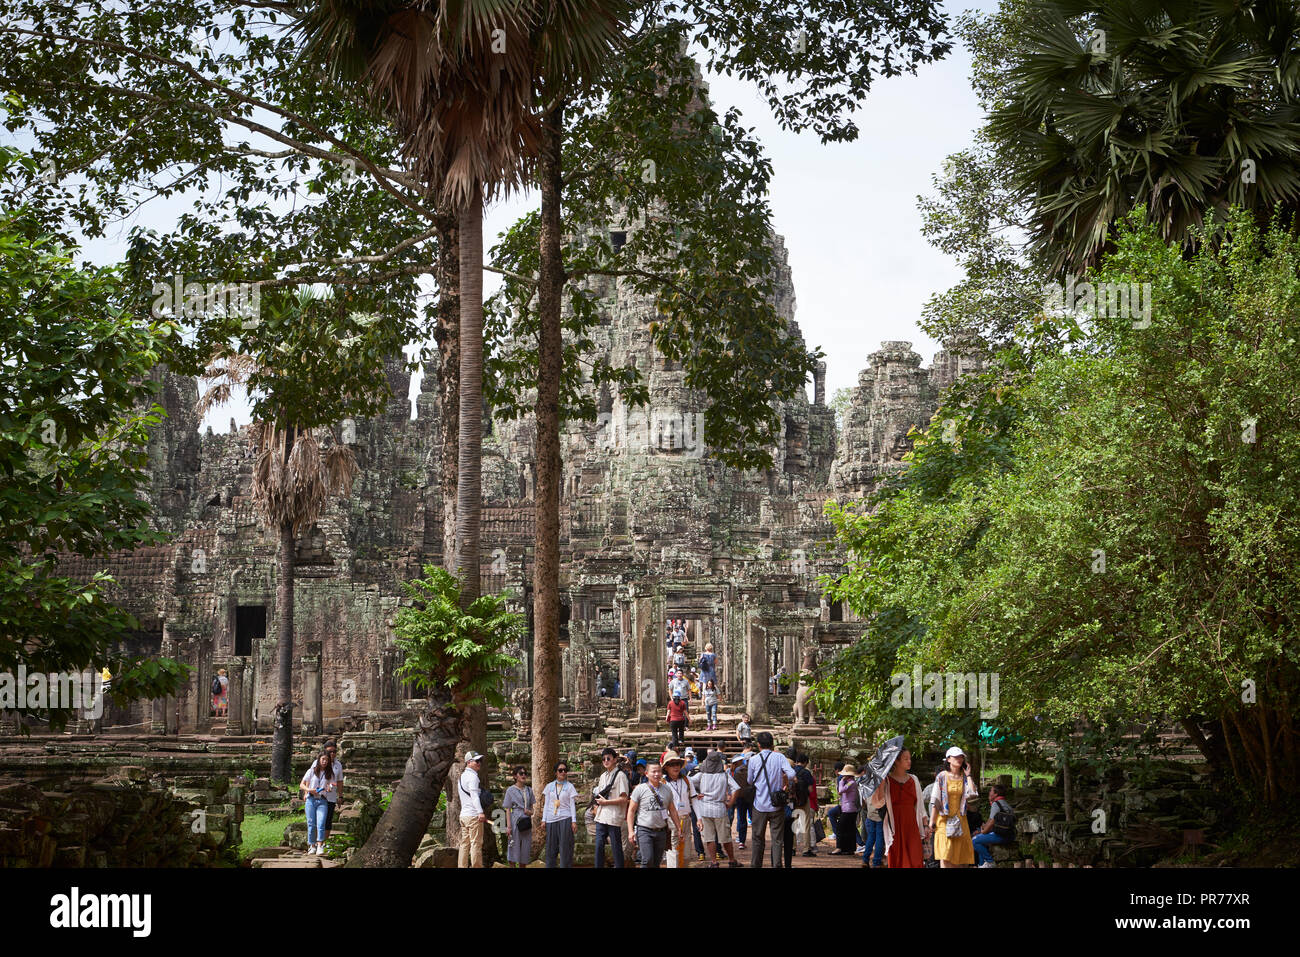 Tourists in Bayon Temple ruins in Angkor Wat. The Angkor Wat complex, Built during the Khmer Empire age, located in Siem Reap, Cambodia, is the larges Stock Photo